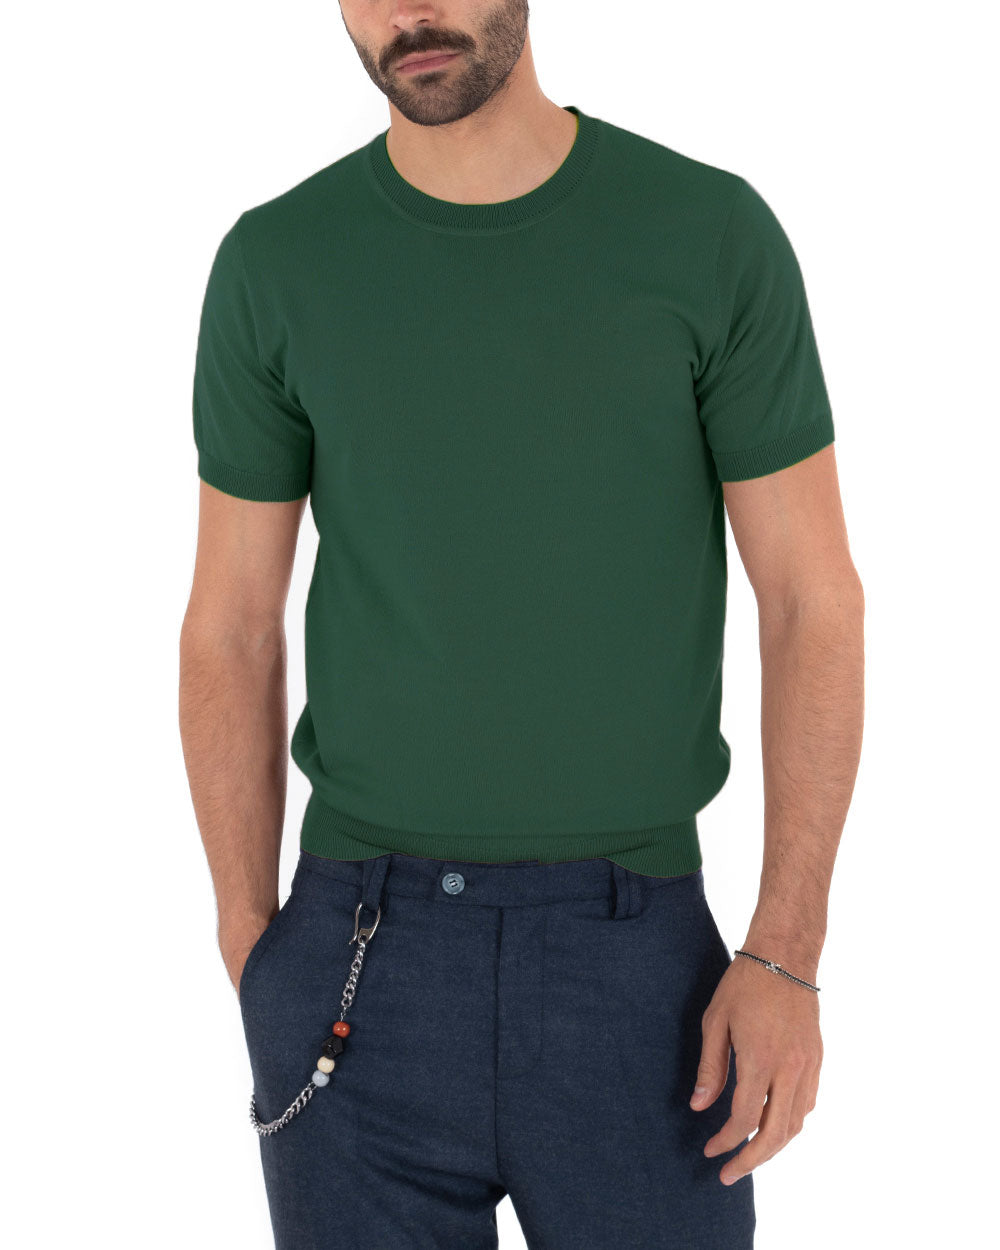 Men's T-Shirt Short Sleeve Solid Color Green Round Neck Casual Thread GIOSAL-TS2776A